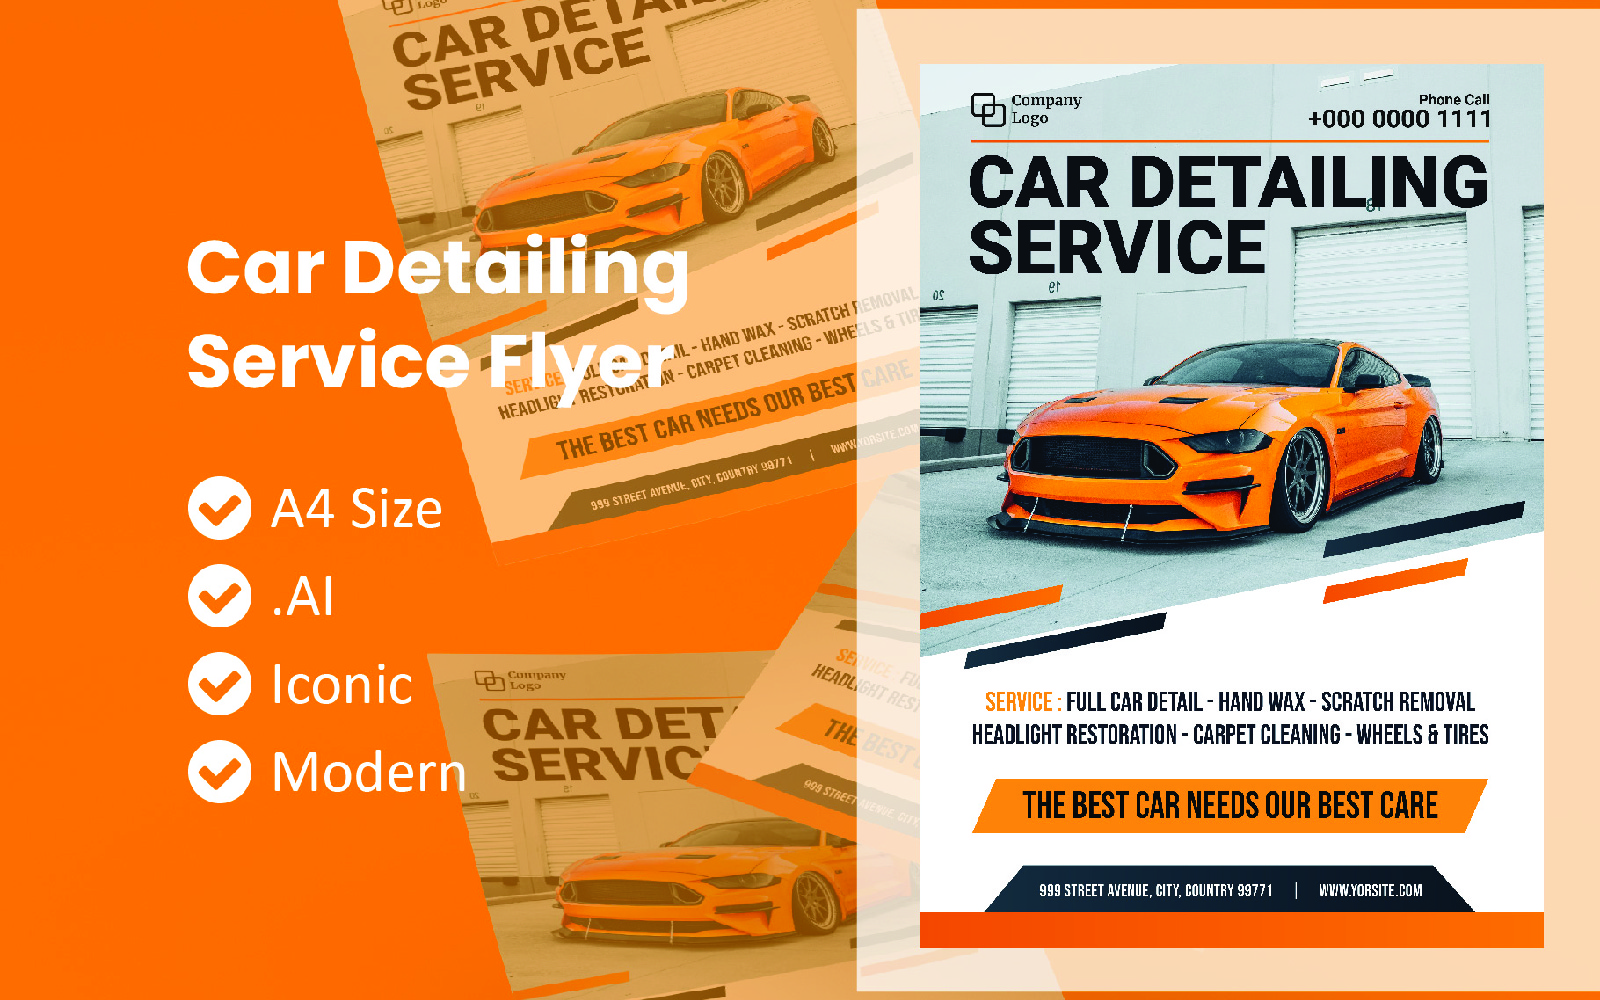 Car Detailing Service Flyer - Corporate Identity Template